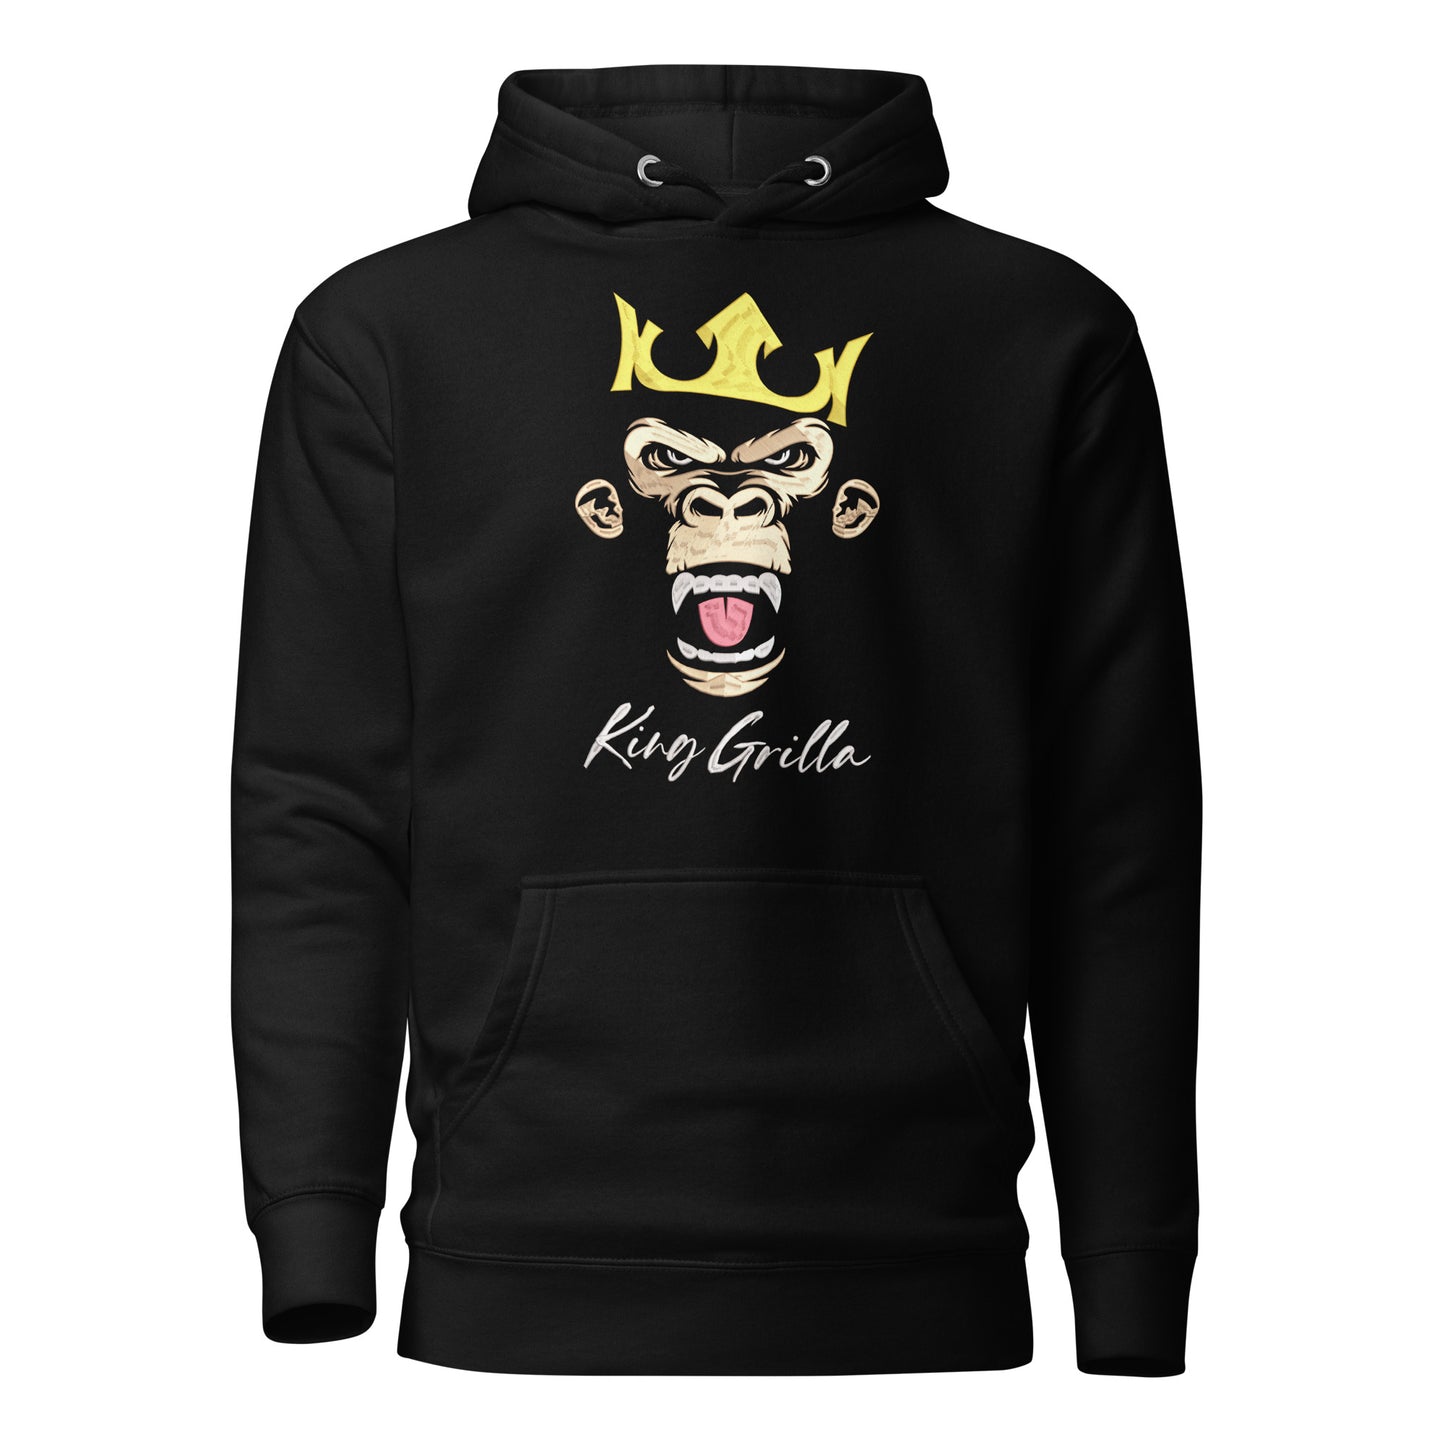 King Grilla - King of the Jungle Premium Hoodie